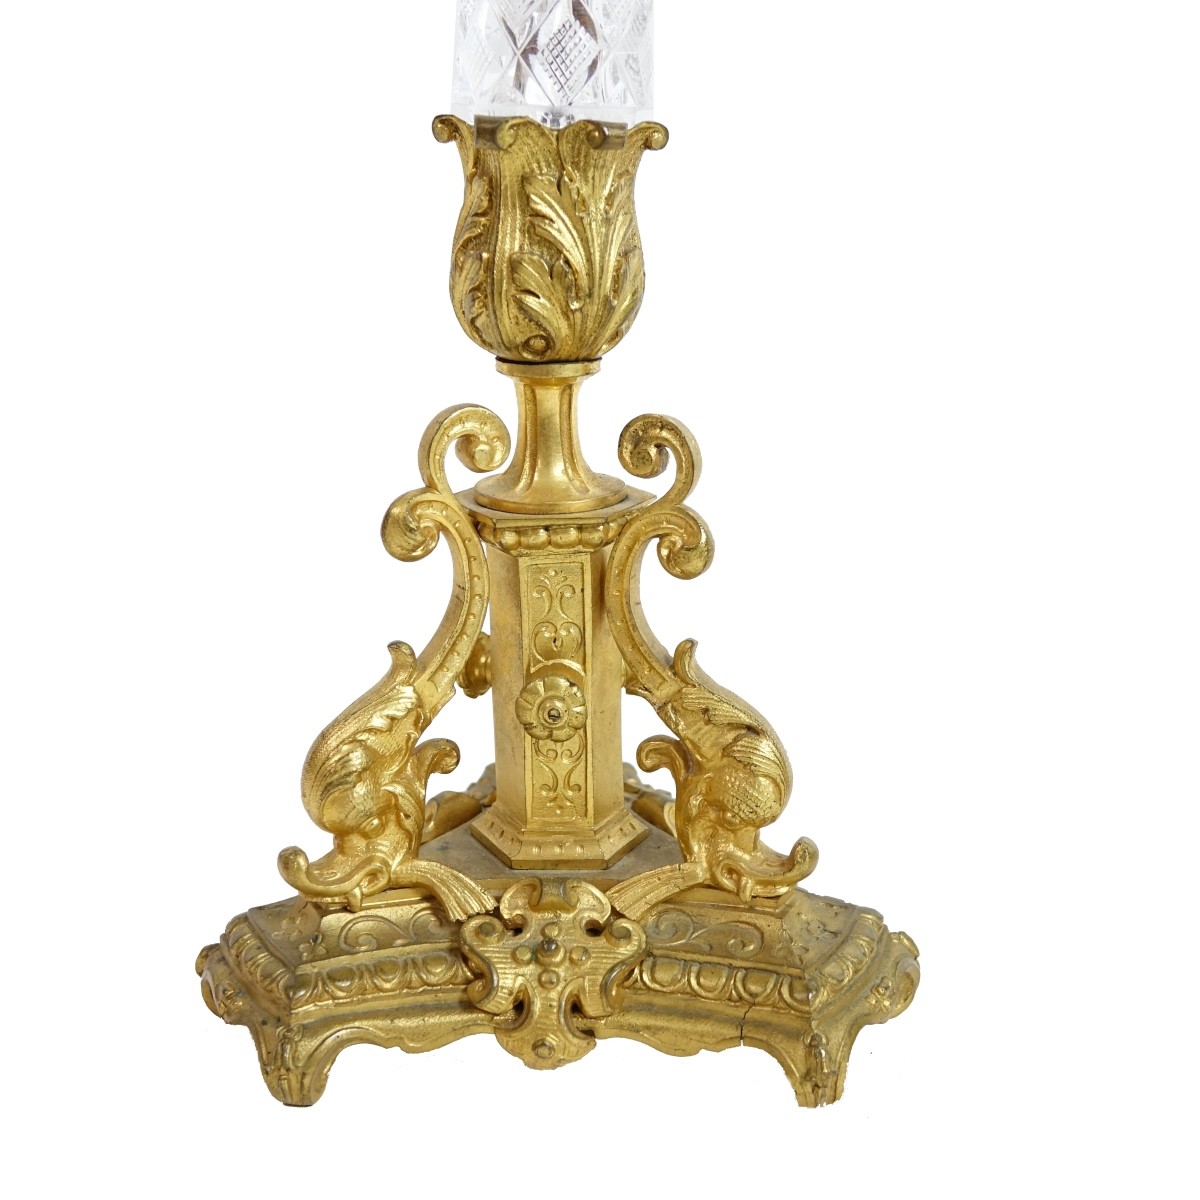 Pair of French Neoclassical Style Candelabra